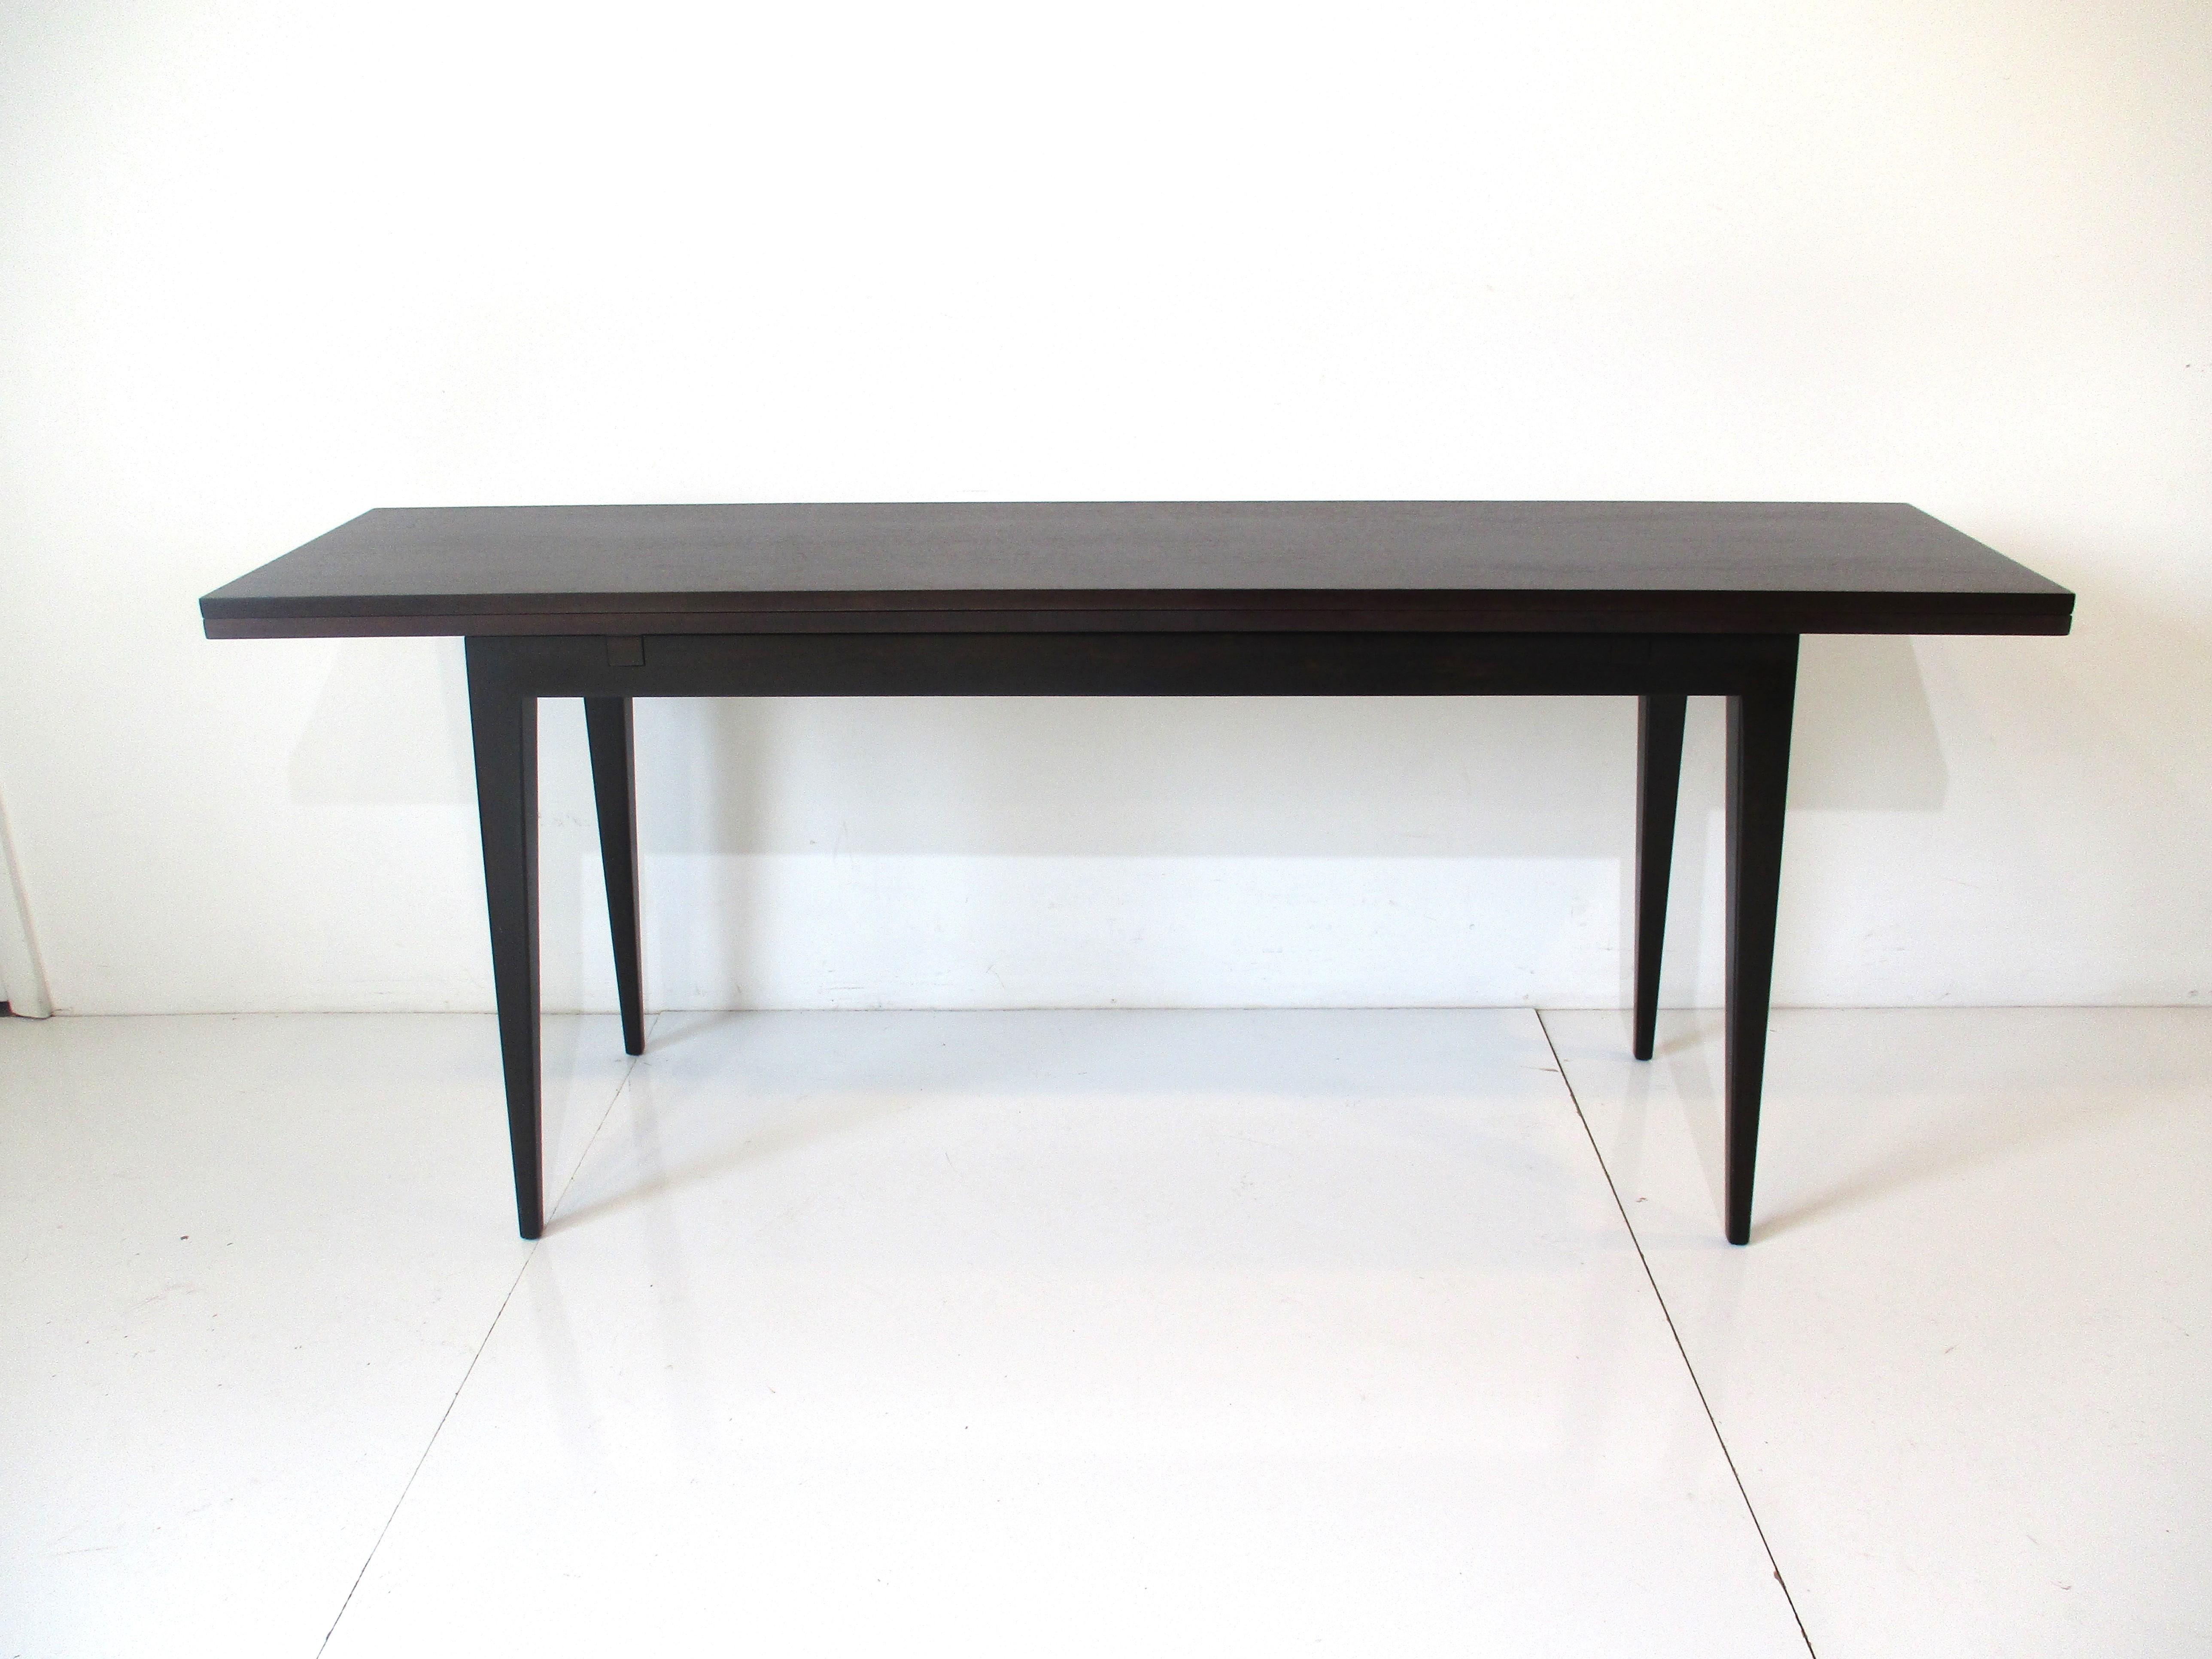 A well crafted and rich looking console flip top dining table with dark ebony finish and satin black tapered legs. The back edge of the piece has hinges and when the top is pulled forward and the upper panel is opened it makes a nice sized dining